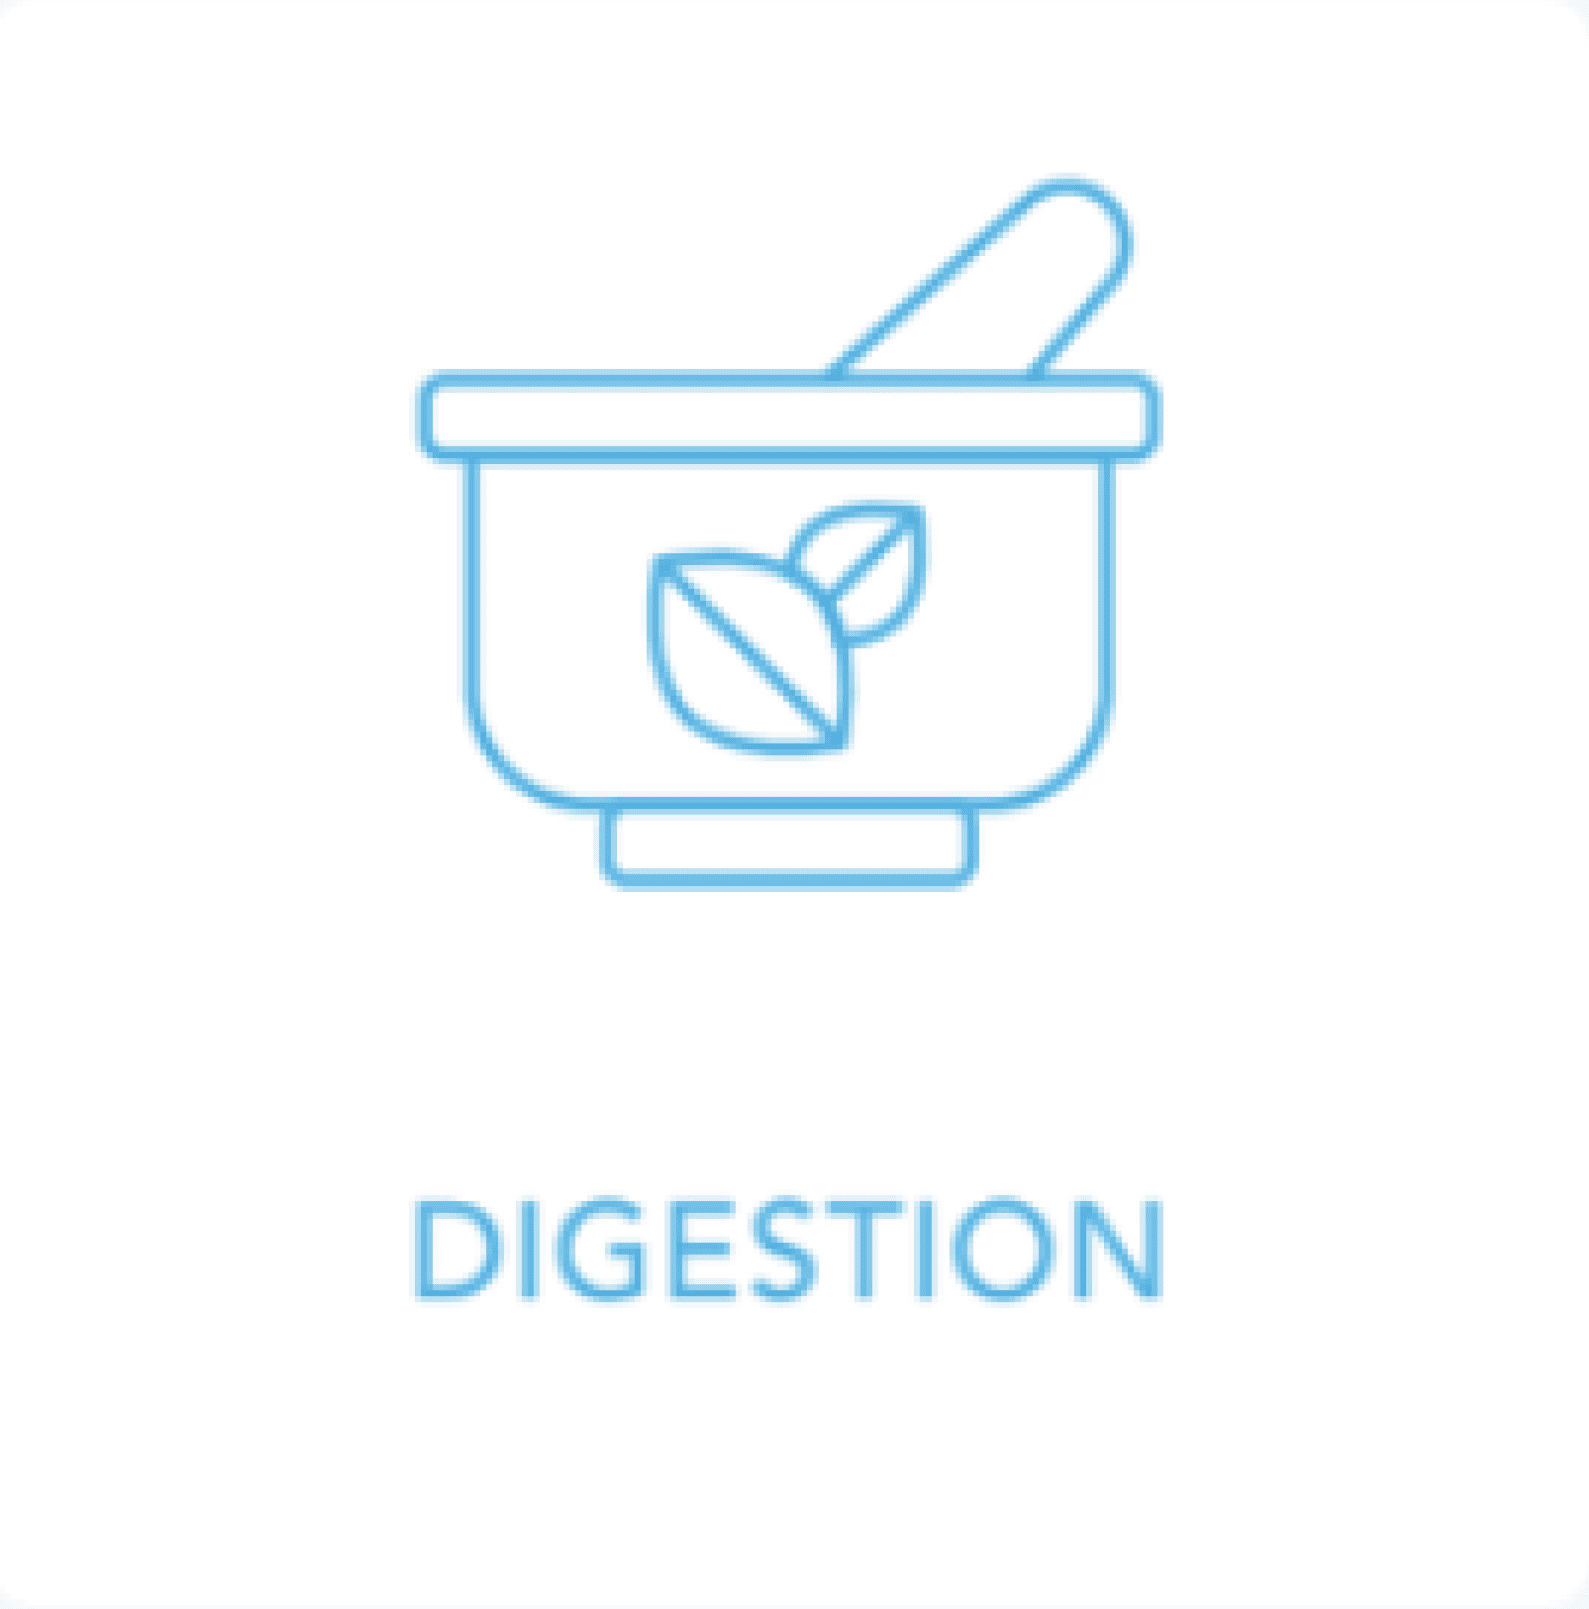 A blue icon with the word digestion written in it.